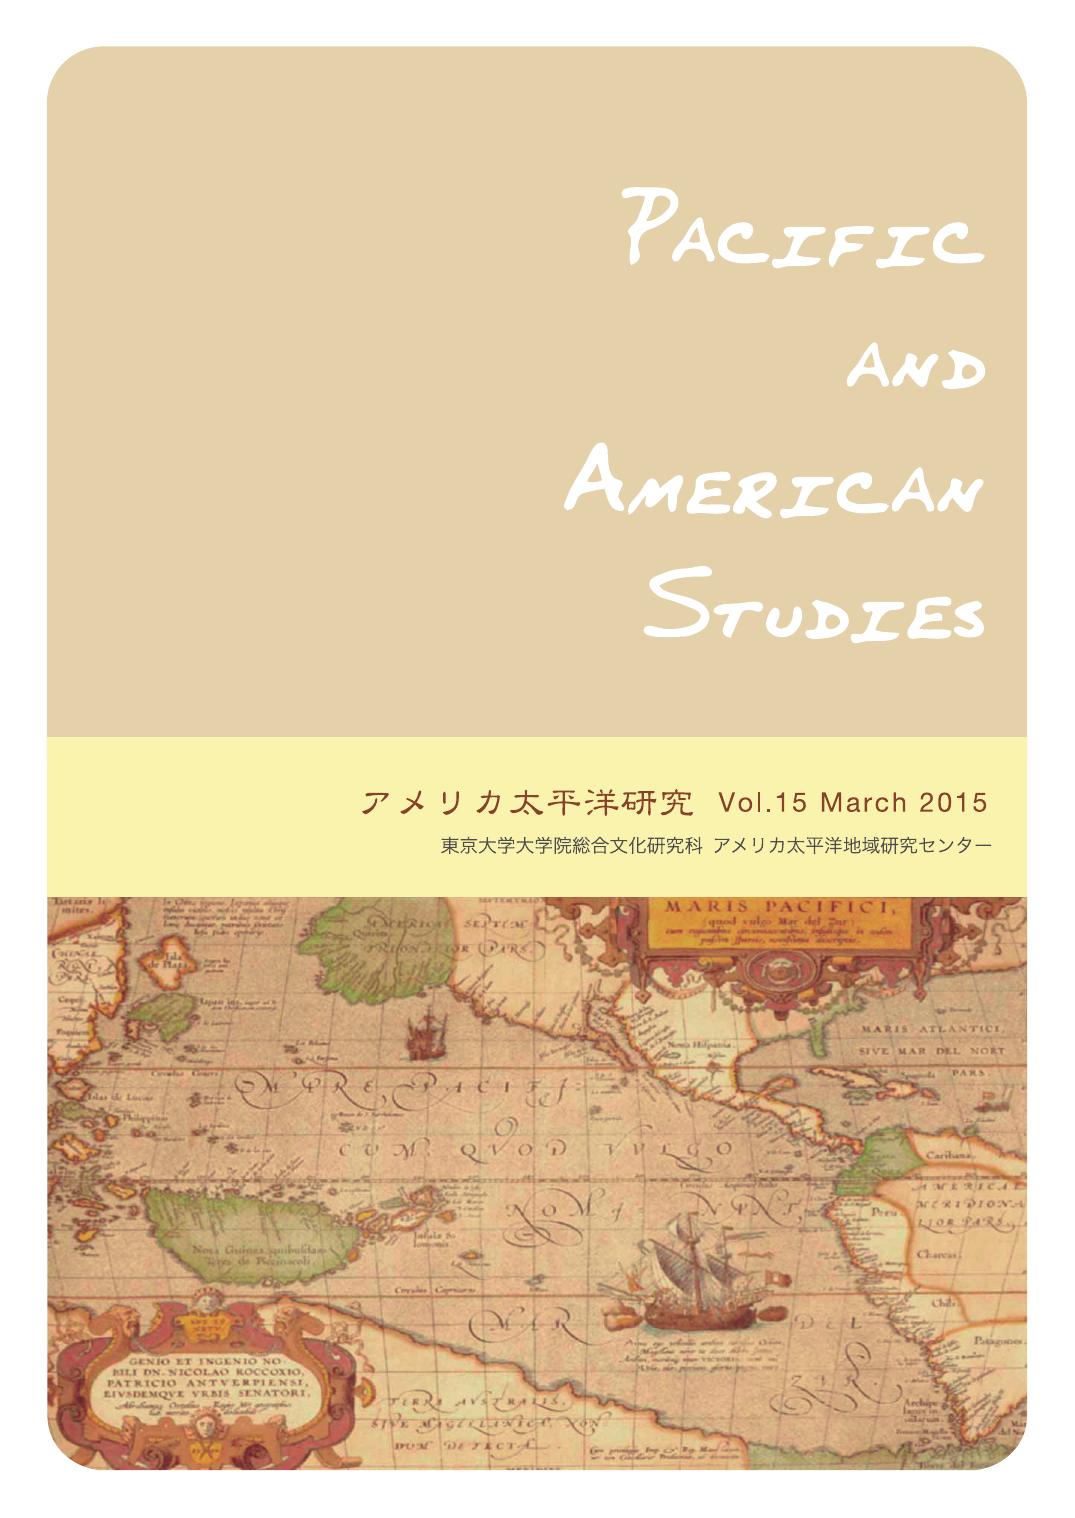 Vol 15 15 Center For Pacific And American Studies